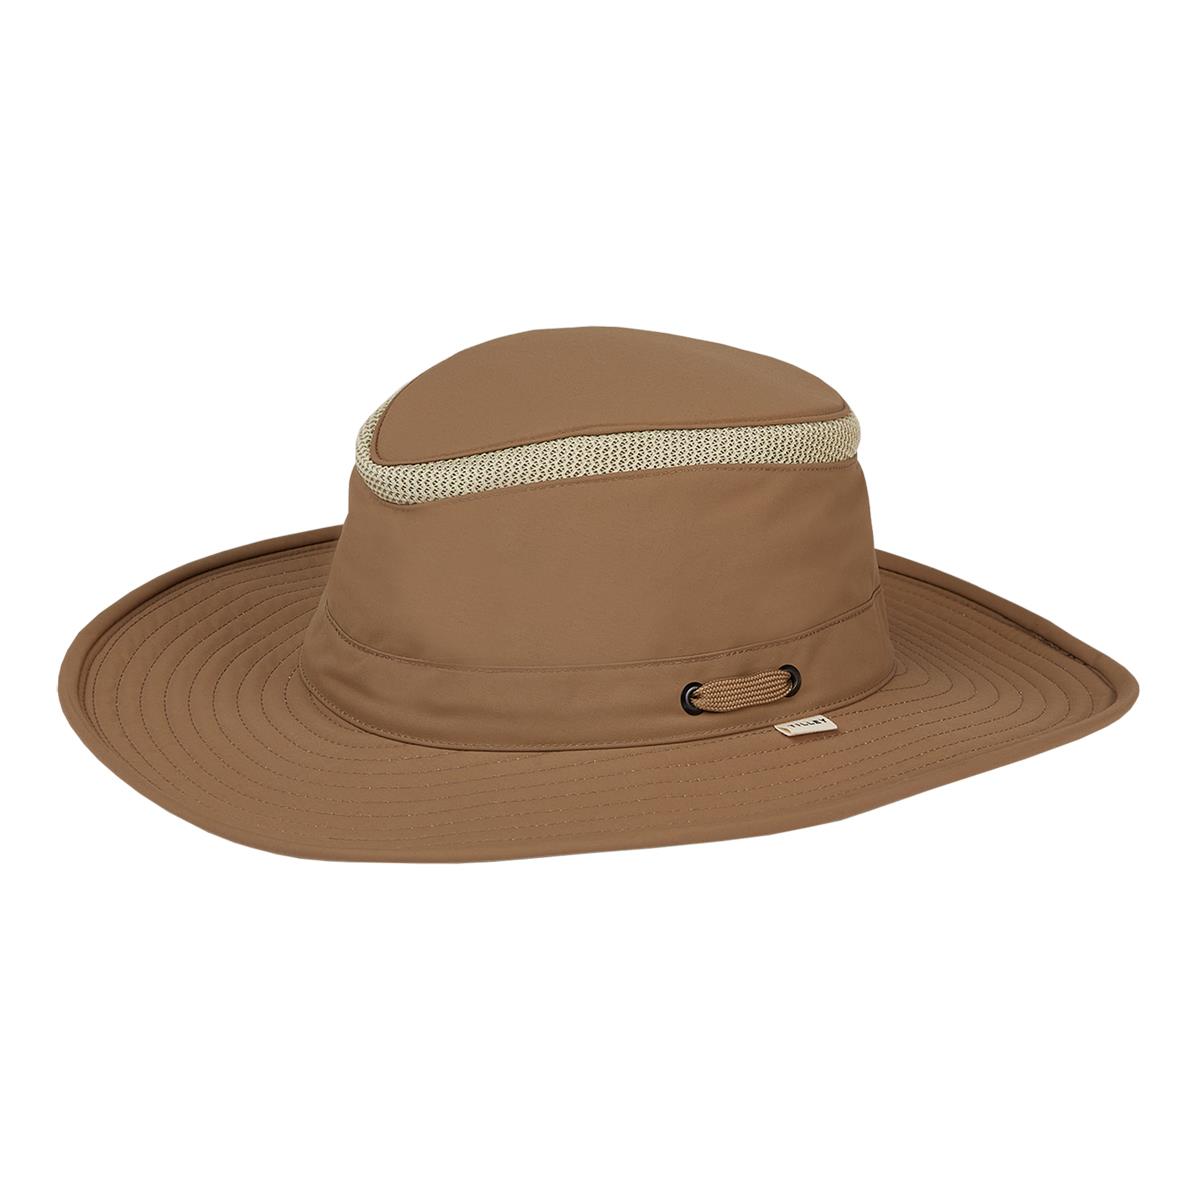 What are the key features of the Tilley Airflo Hat?